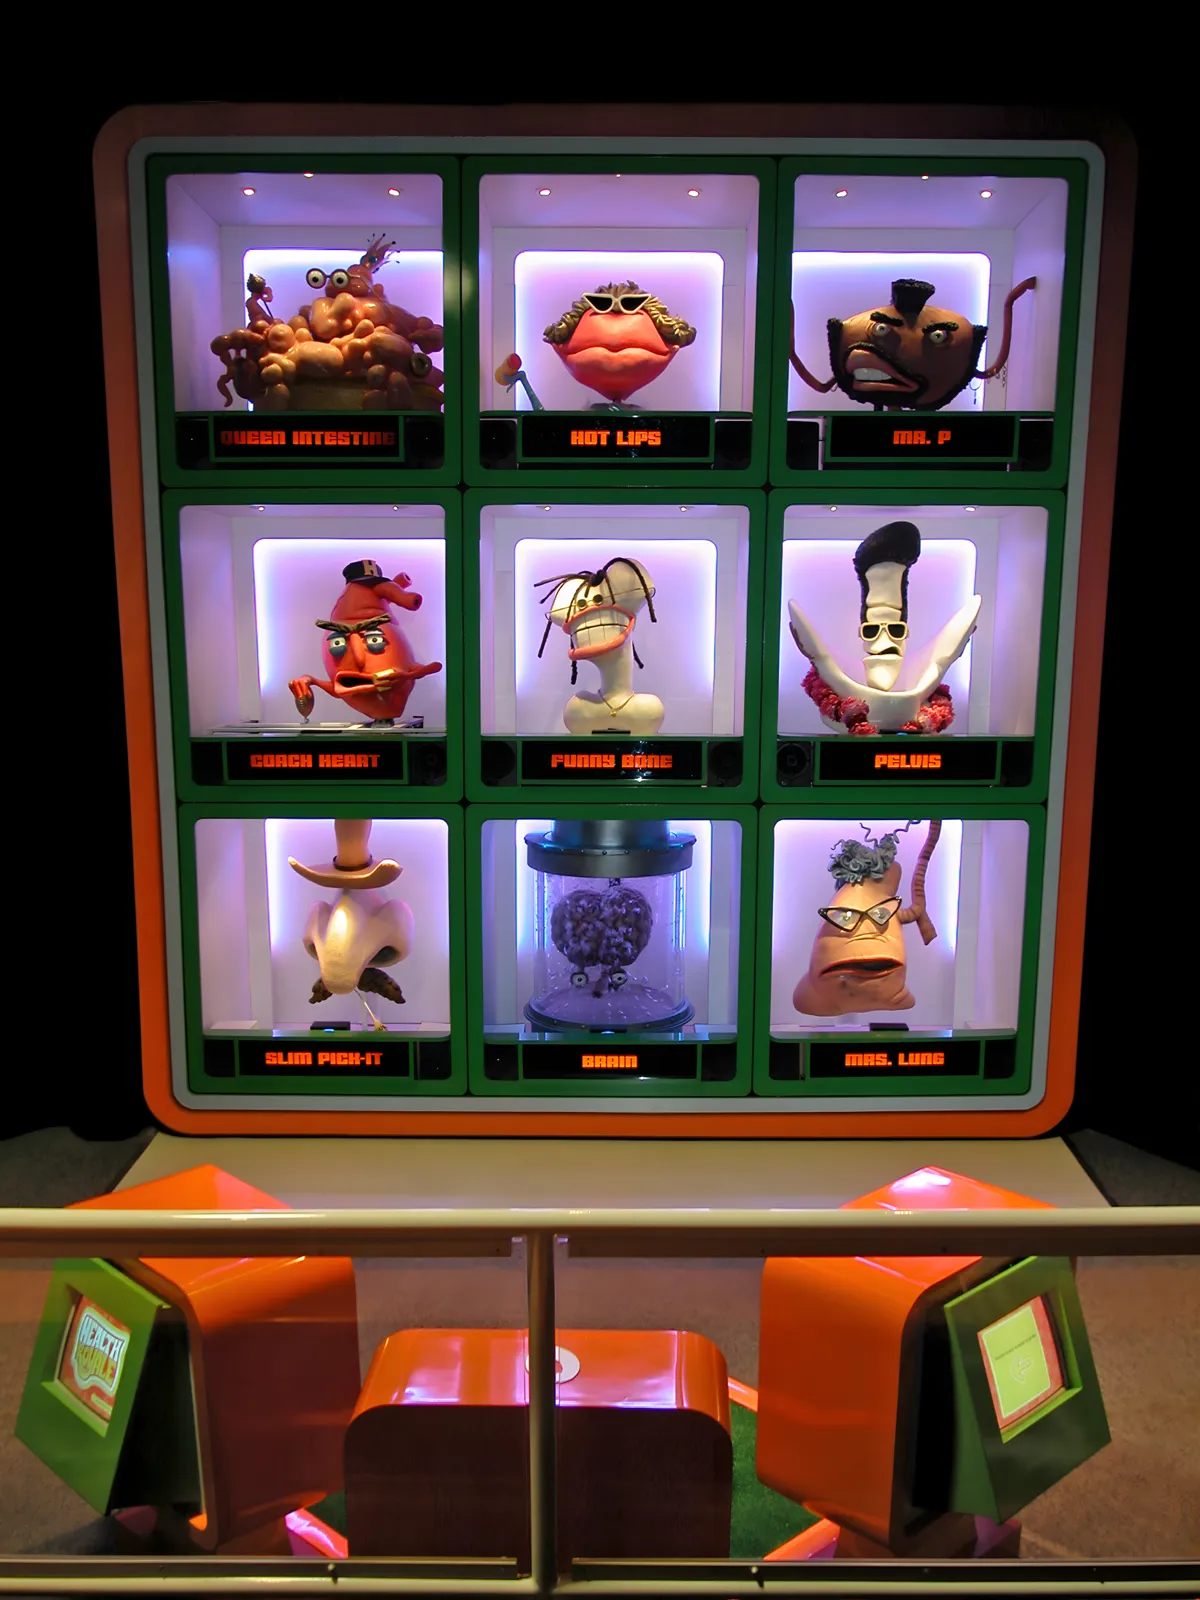 Top 9 Characters at Health Royale cartoon game show